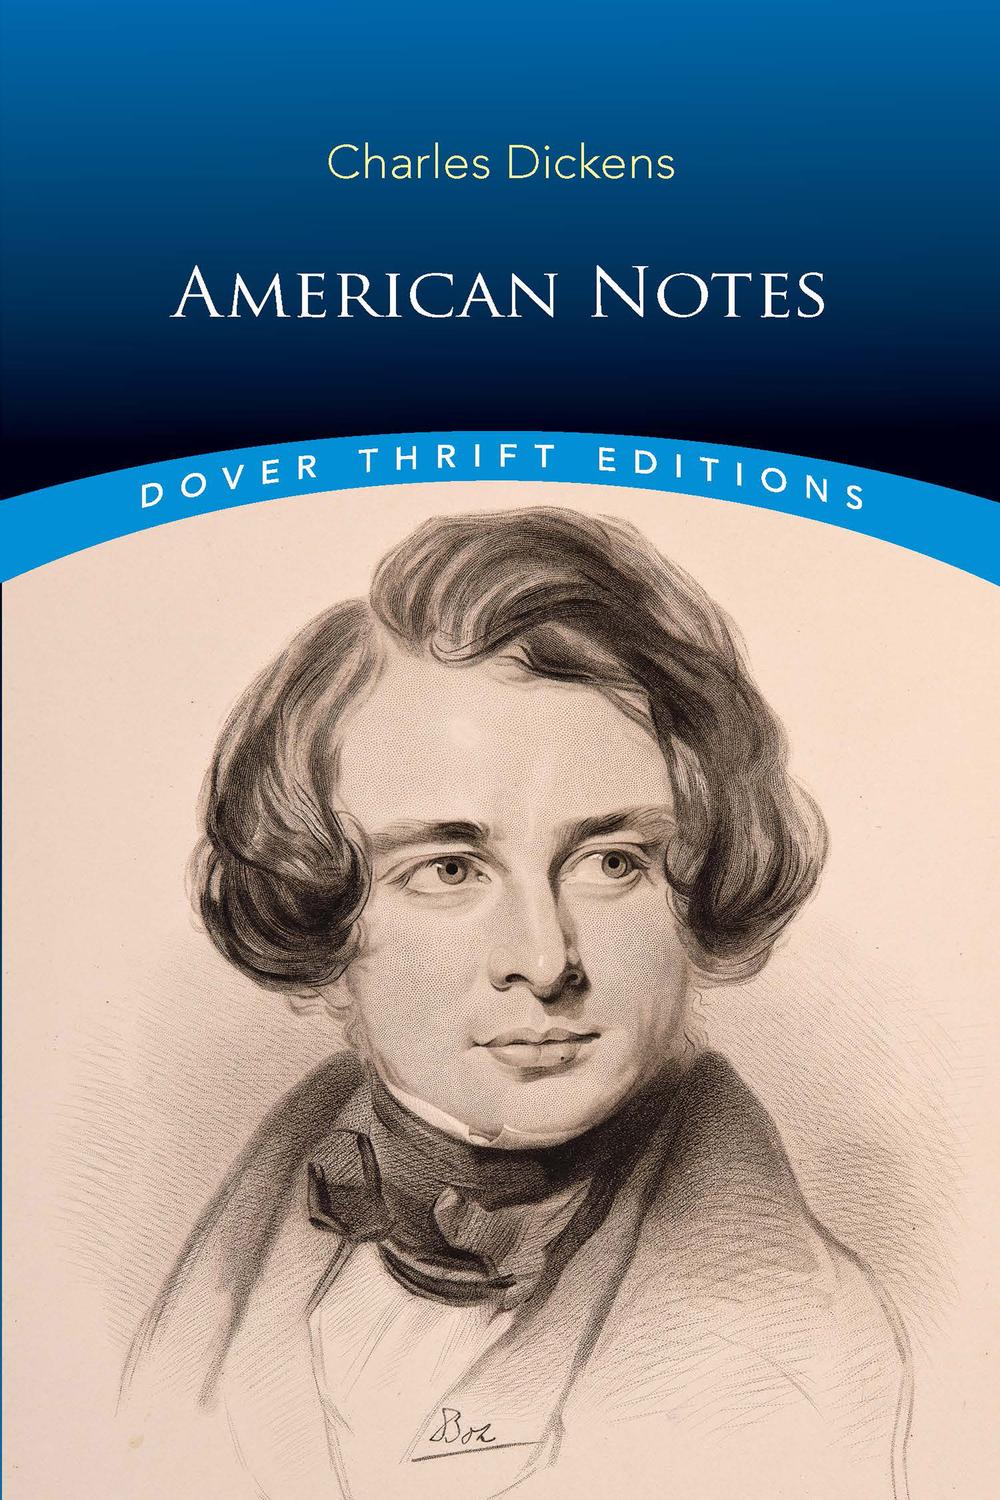 American Notes - Charles Dickens,,